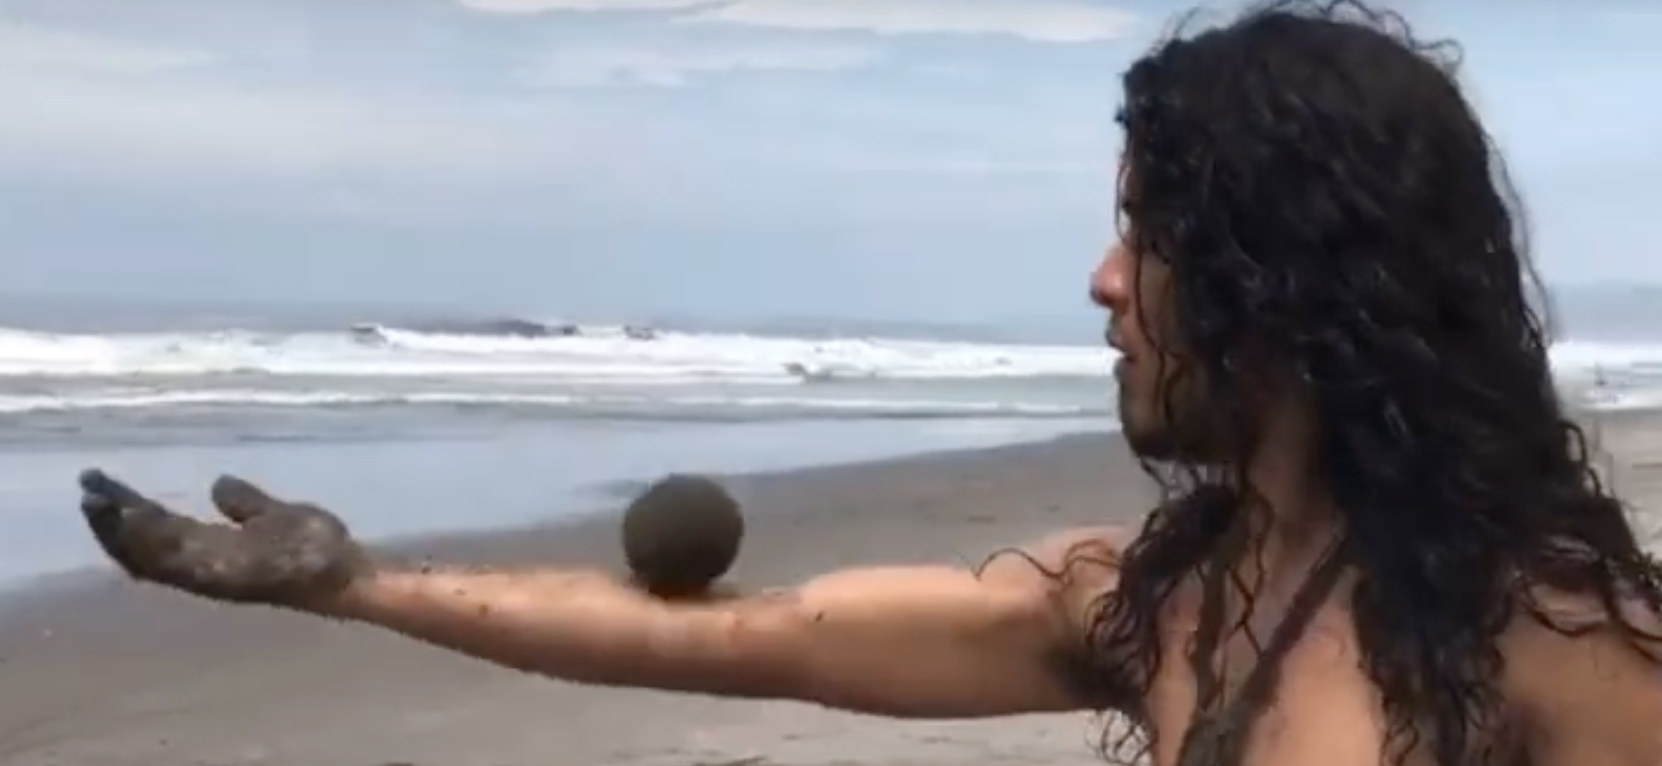 Photo shows a man at the beach with no shirt, with a sand globe (sphere of sand) balanced on his arm stretched out horizontally to the left.